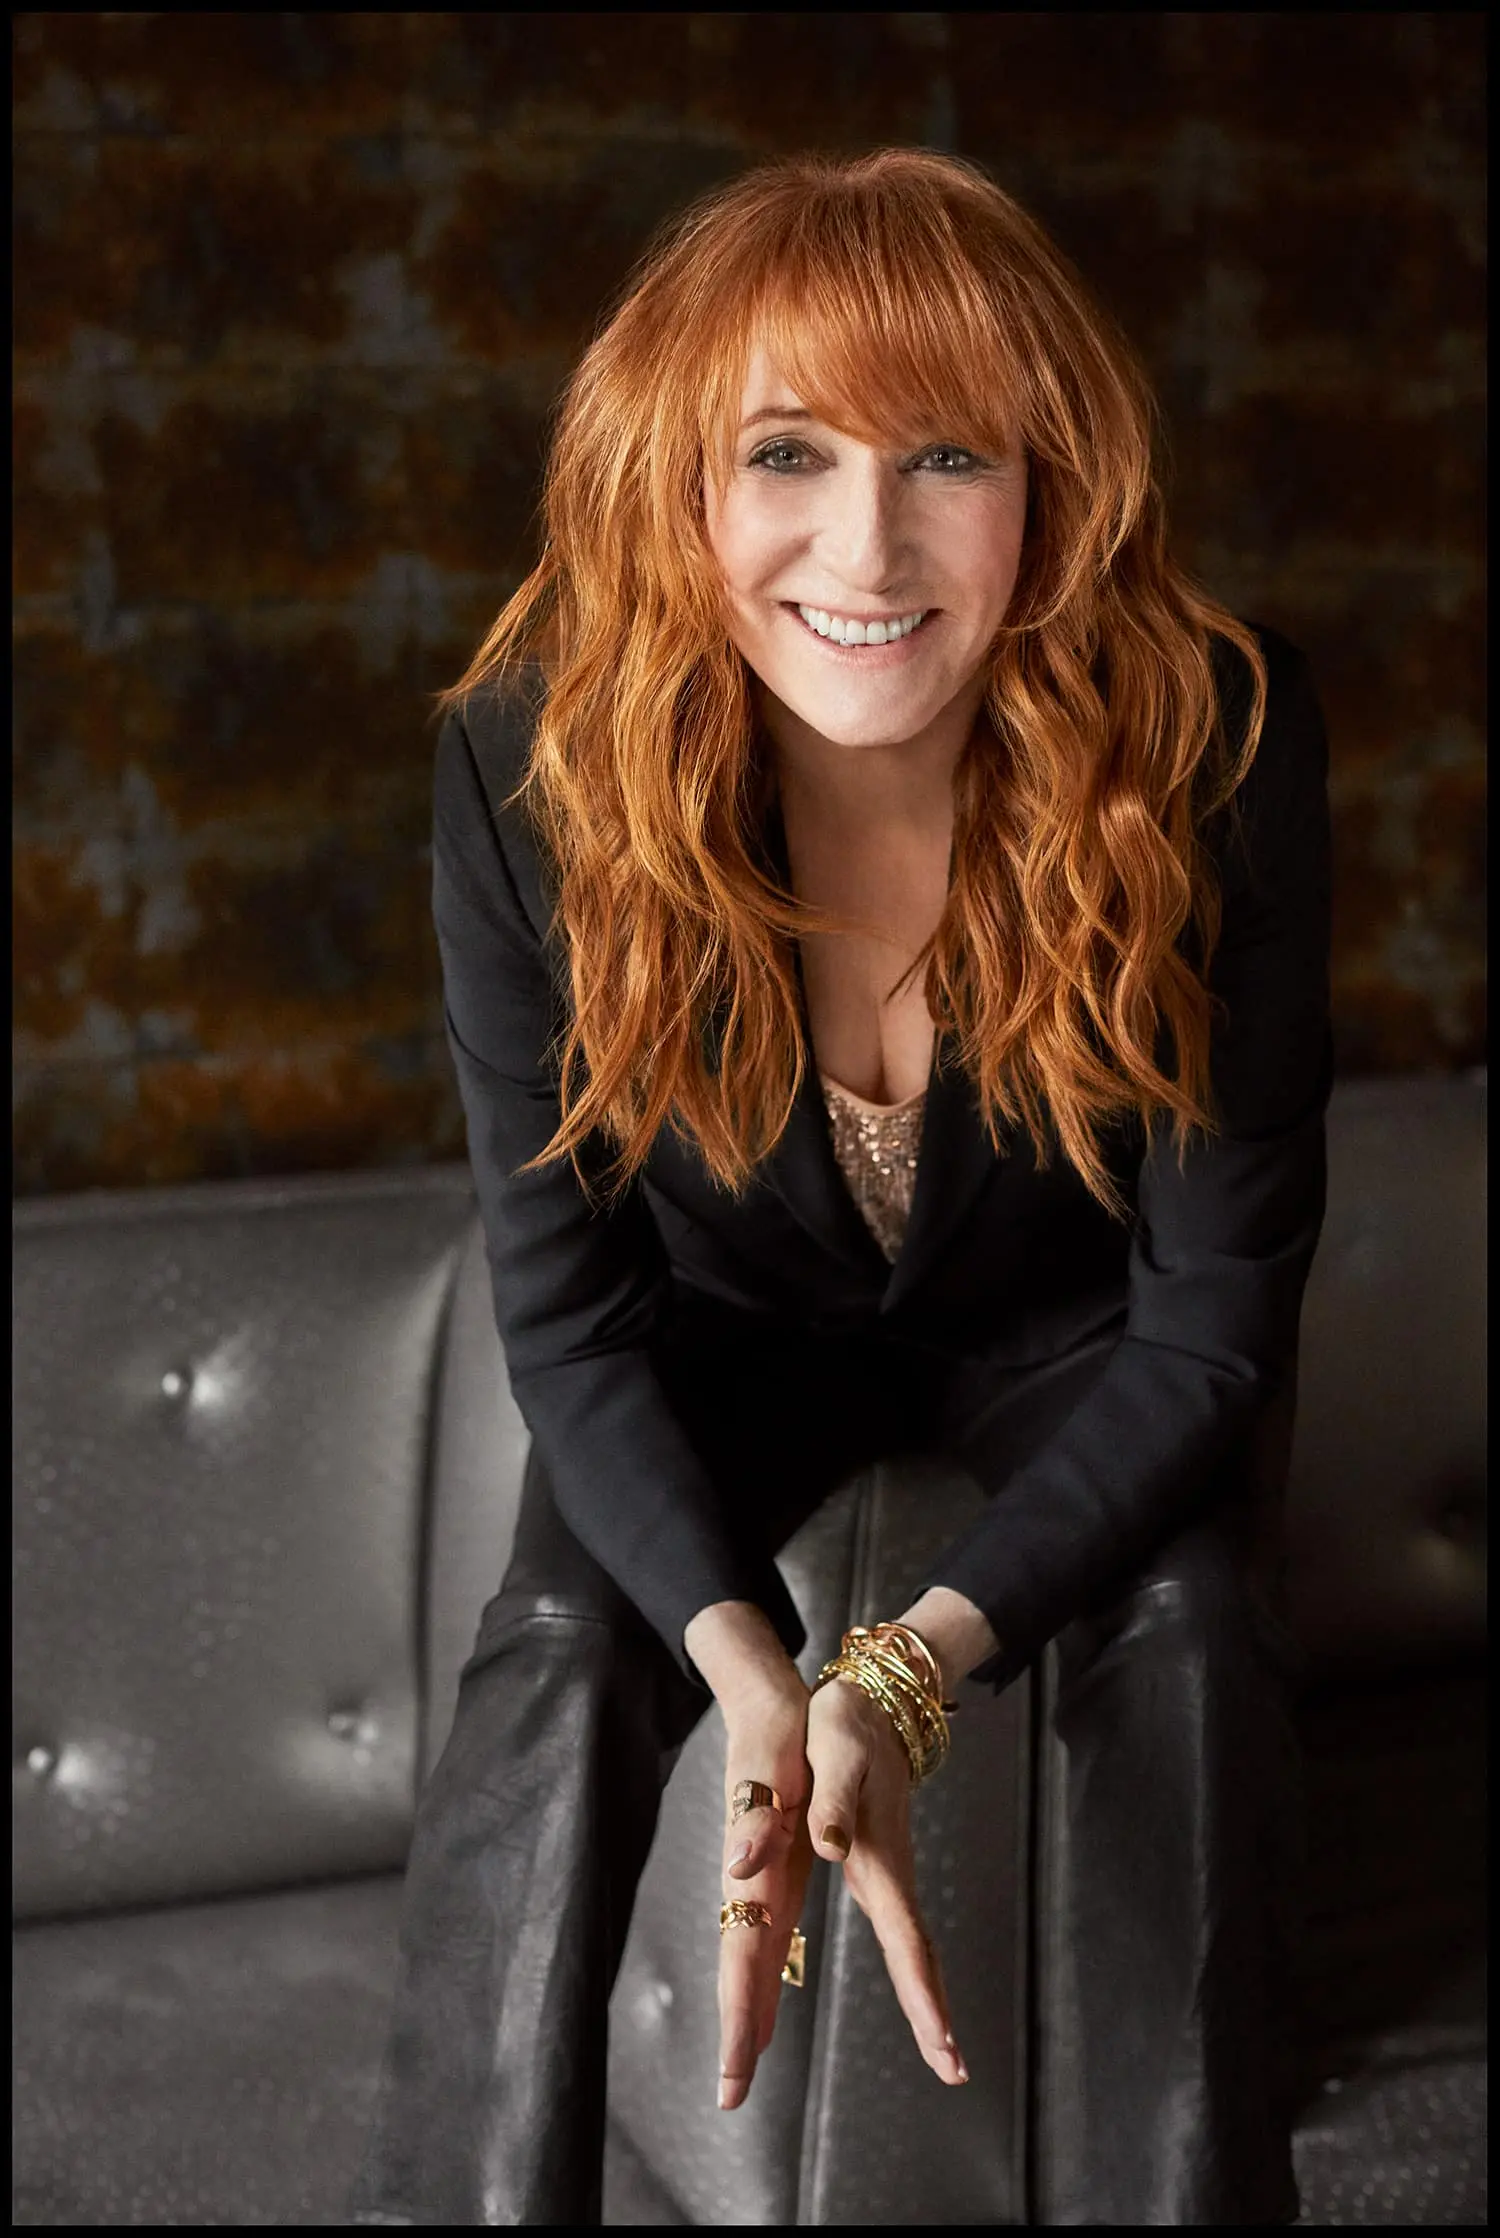 Who Is Patti Scialfa? Age, Bio, Career. Net Worth And More Of Bruce Springsteen's Wife